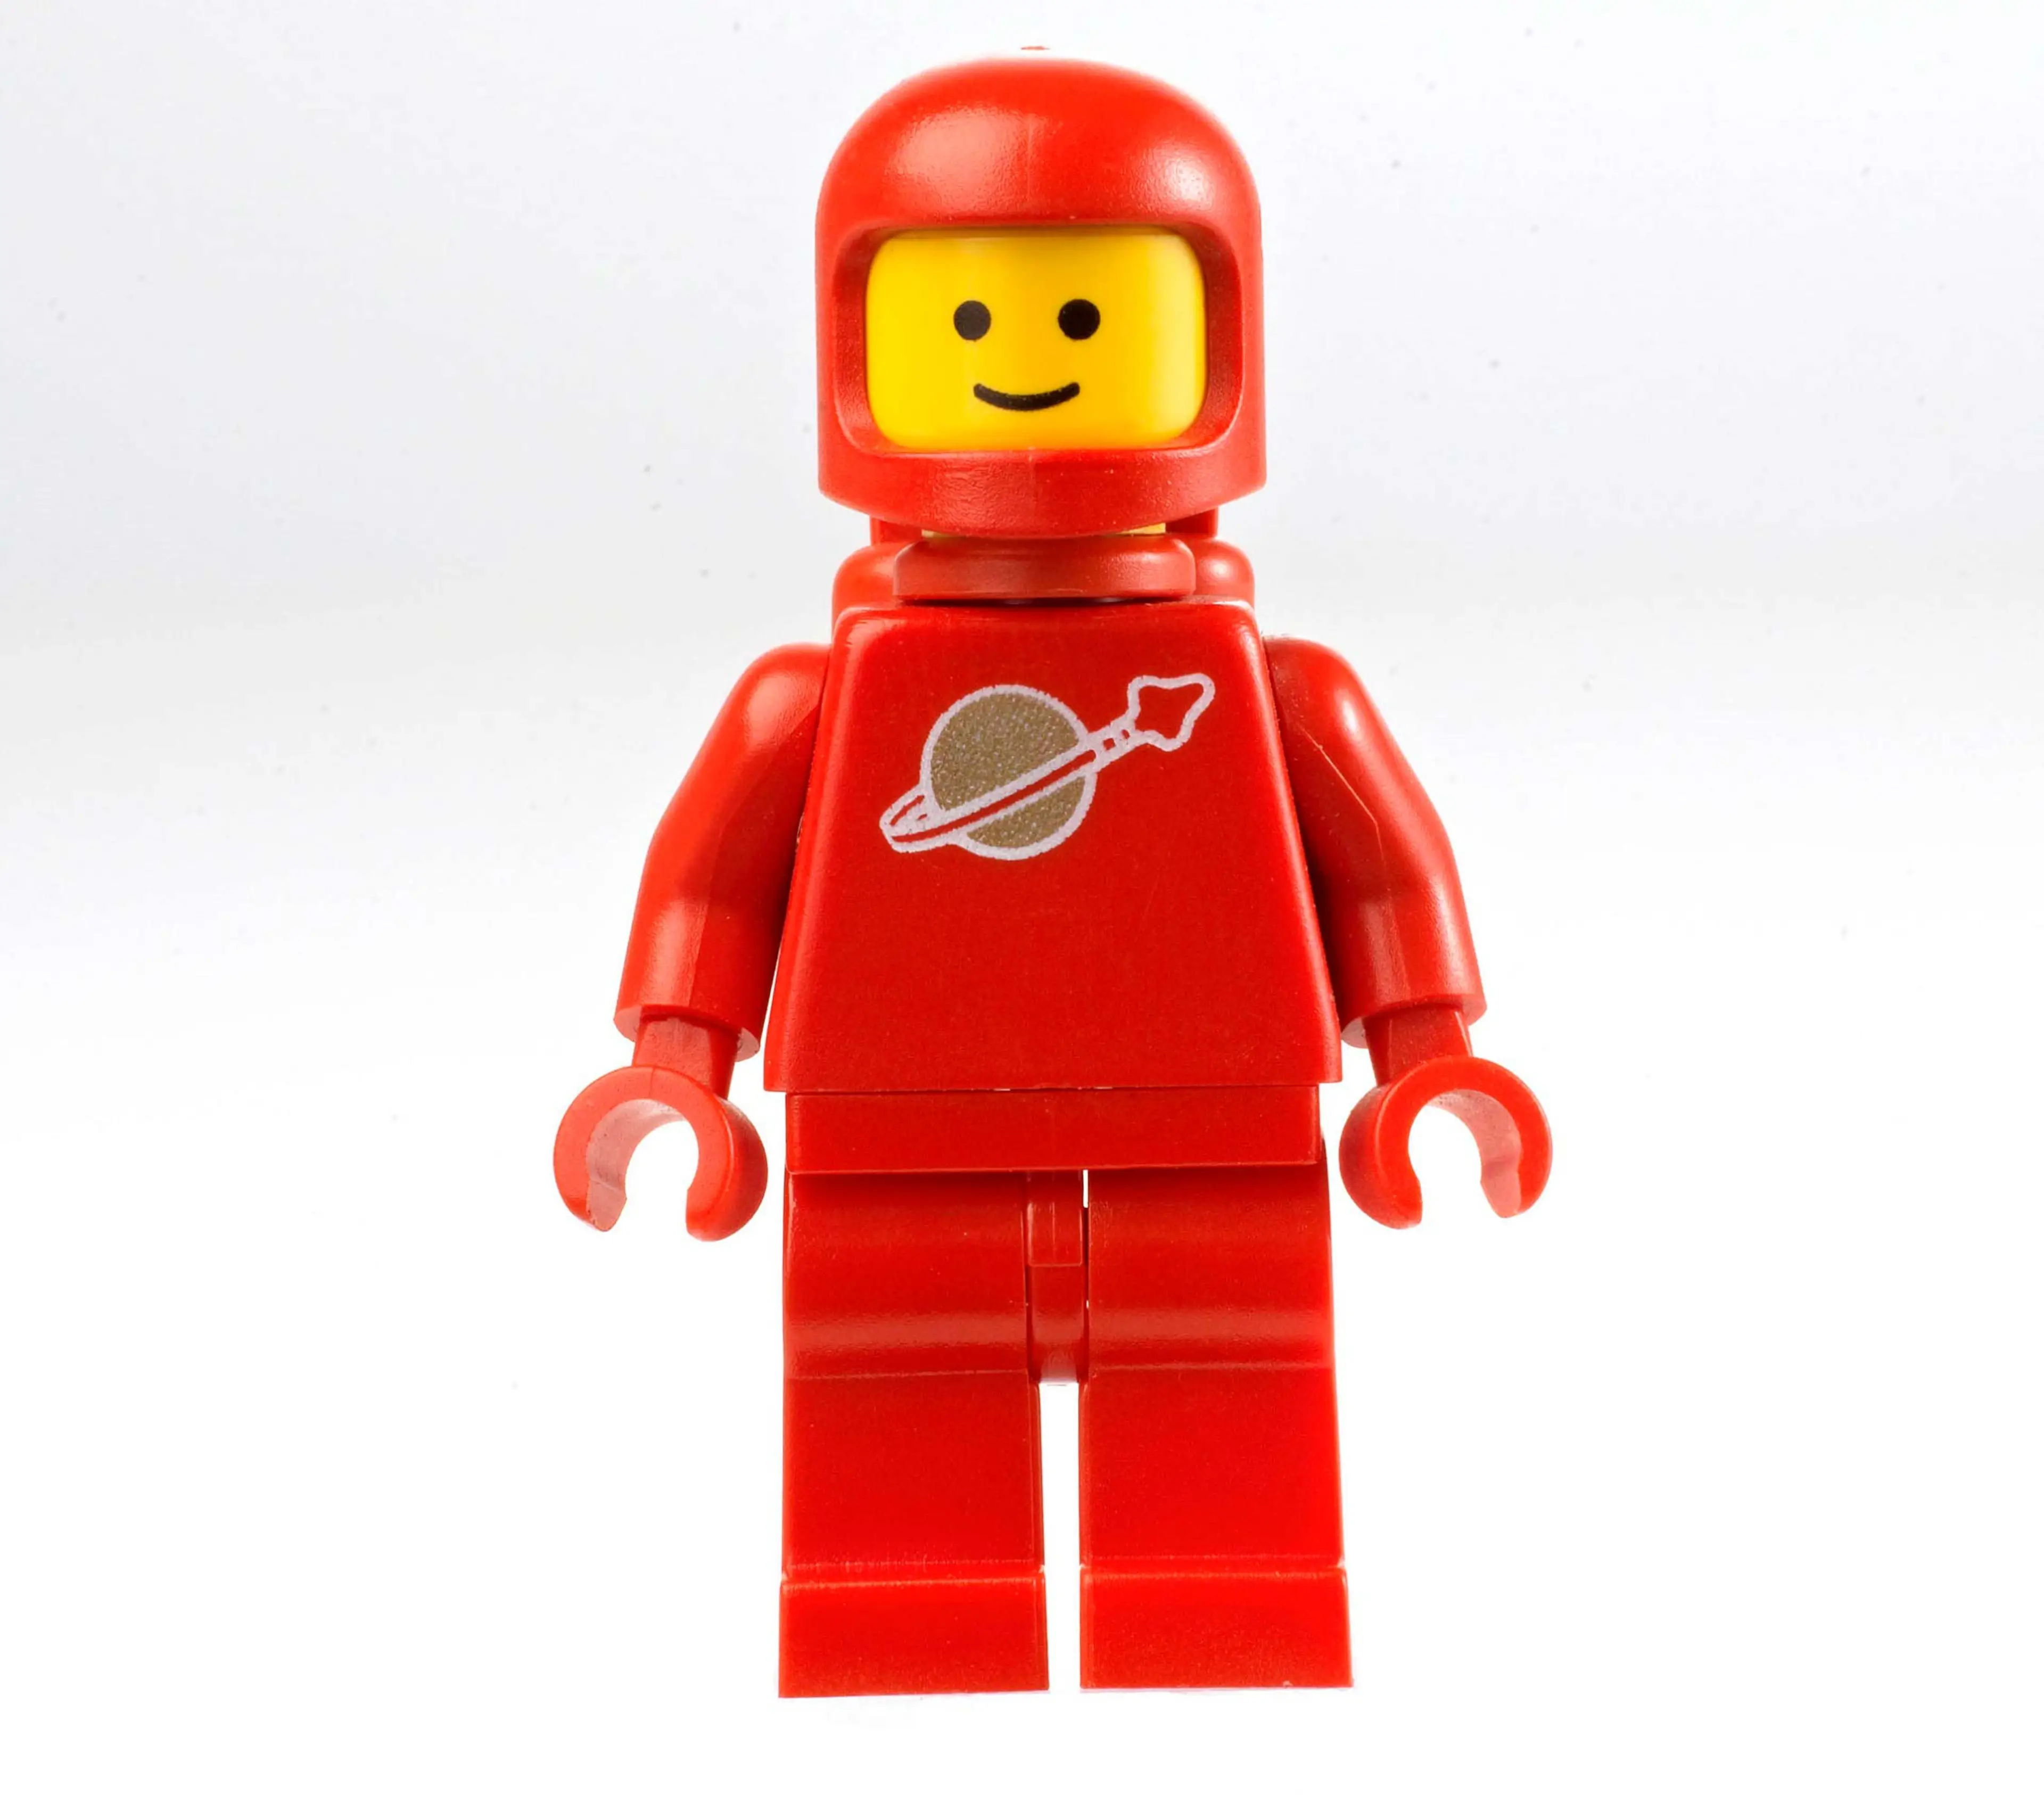 Red LEGO Space minifigure